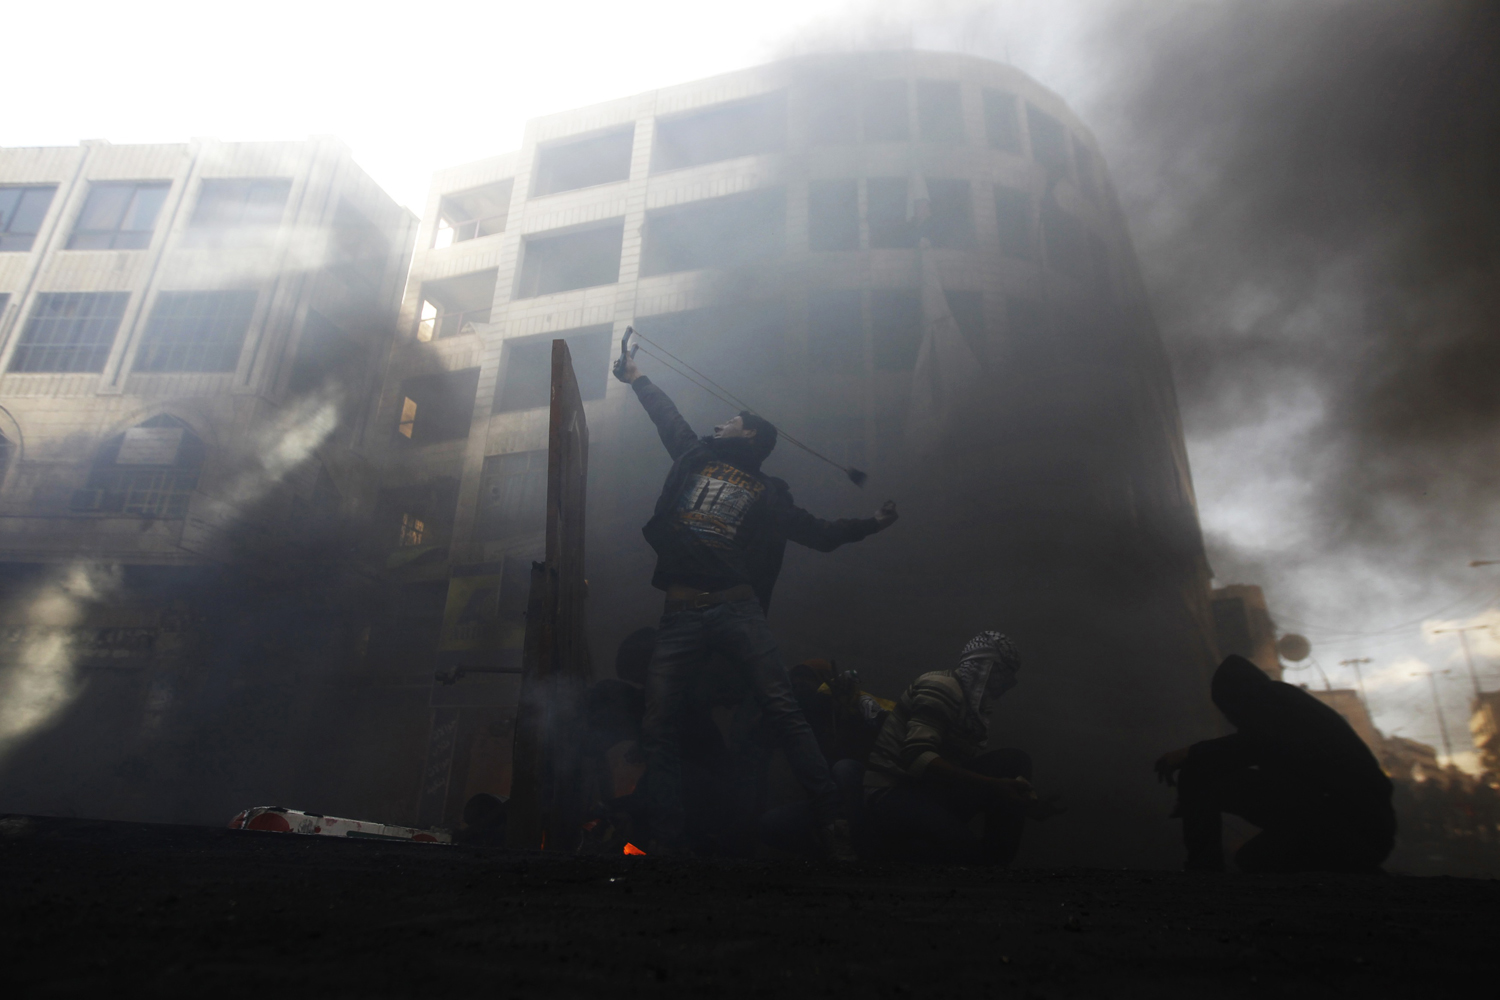 A Palestinian protester uses a sling shot to throw a stone during clashes with Israeli soldiers in Hebron